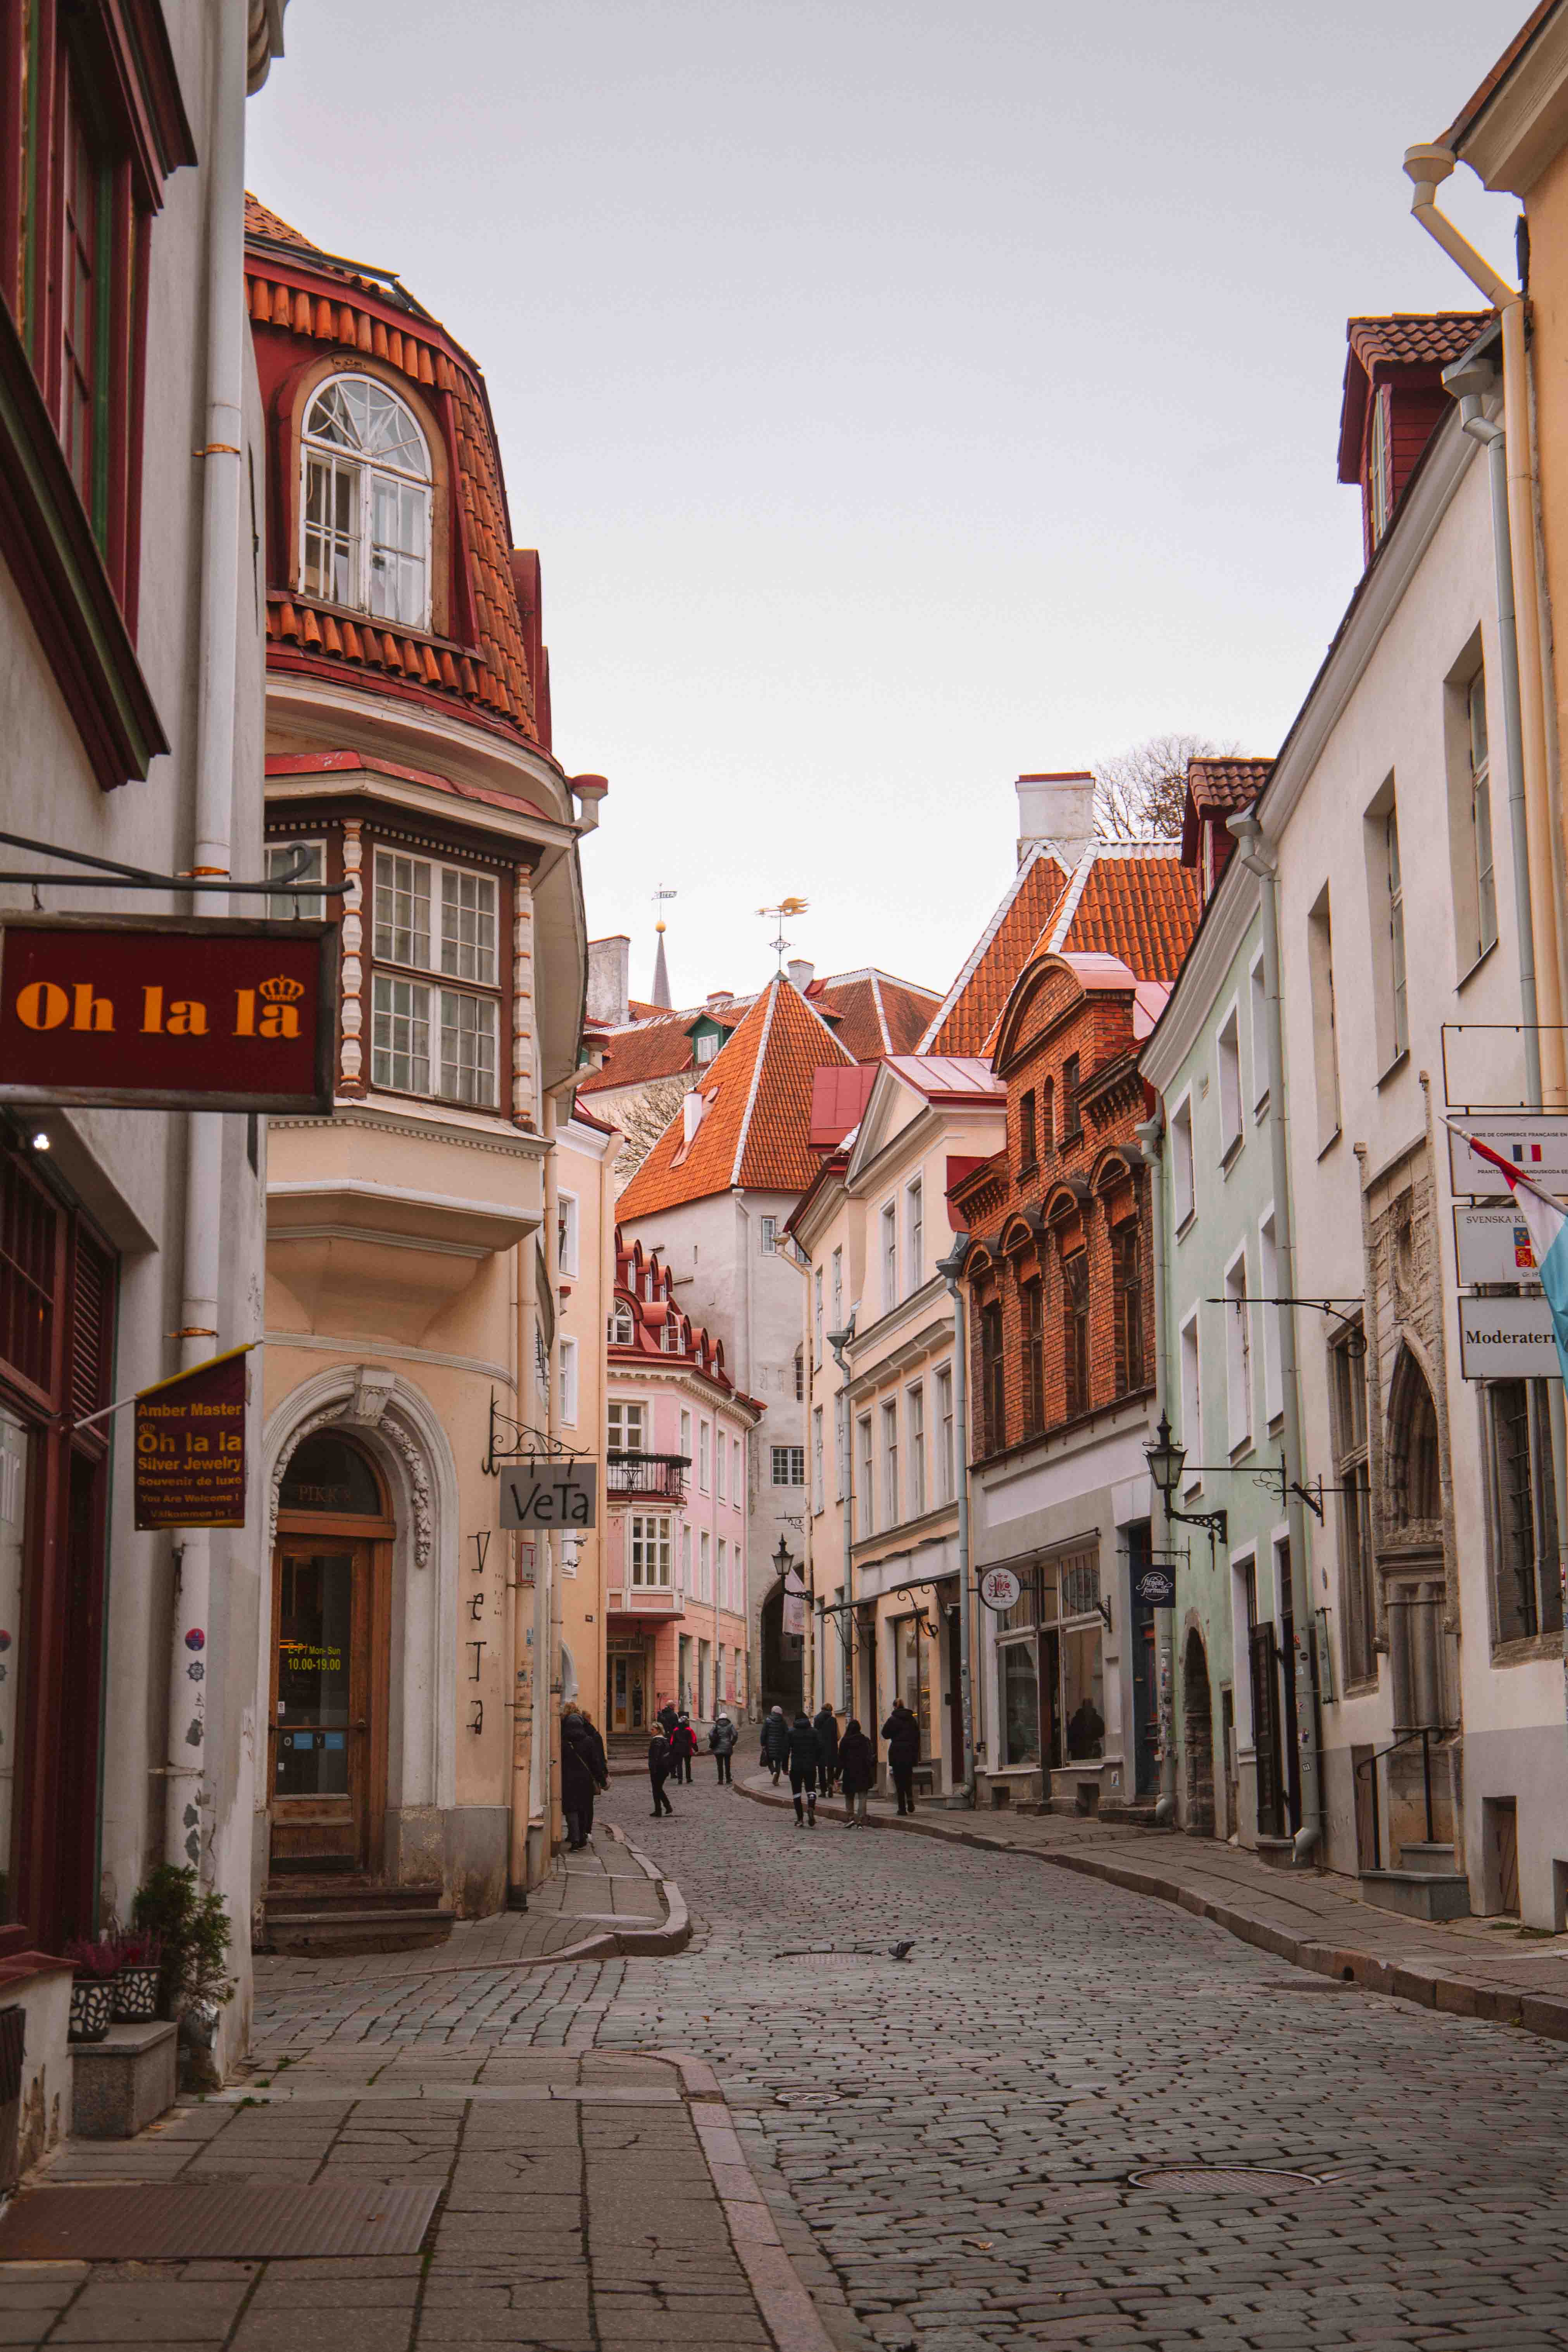 One Day in Tallinn – The Perfect Itinerary for Tallinn’s old town